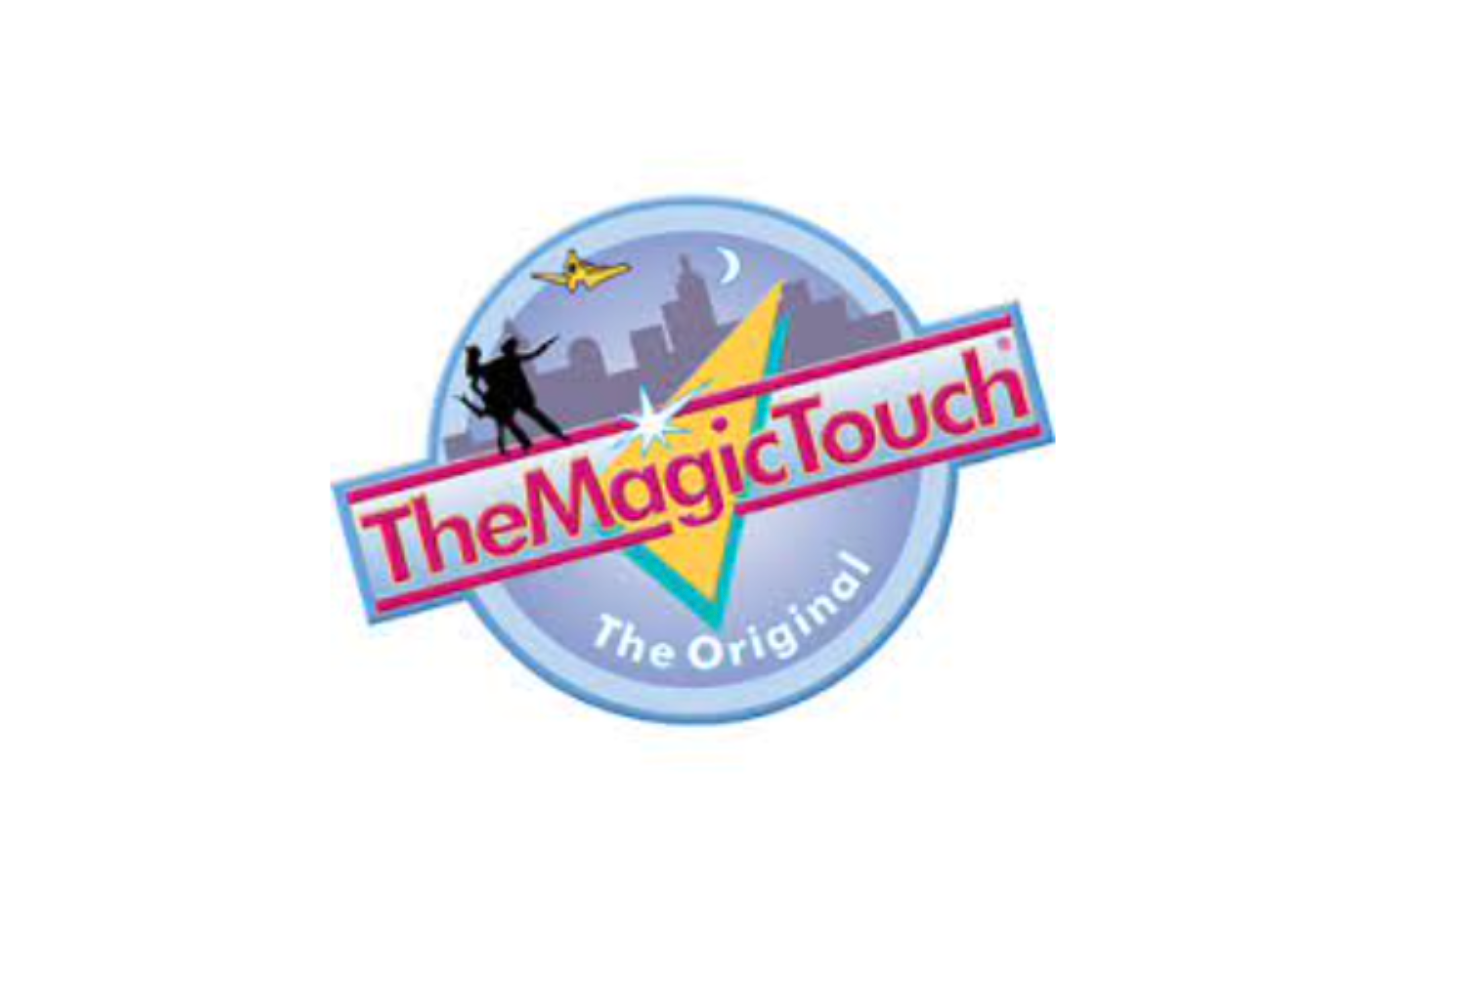 The Magic Touch T.Seal A4 150324 10 sheets per box | The Magic Touch